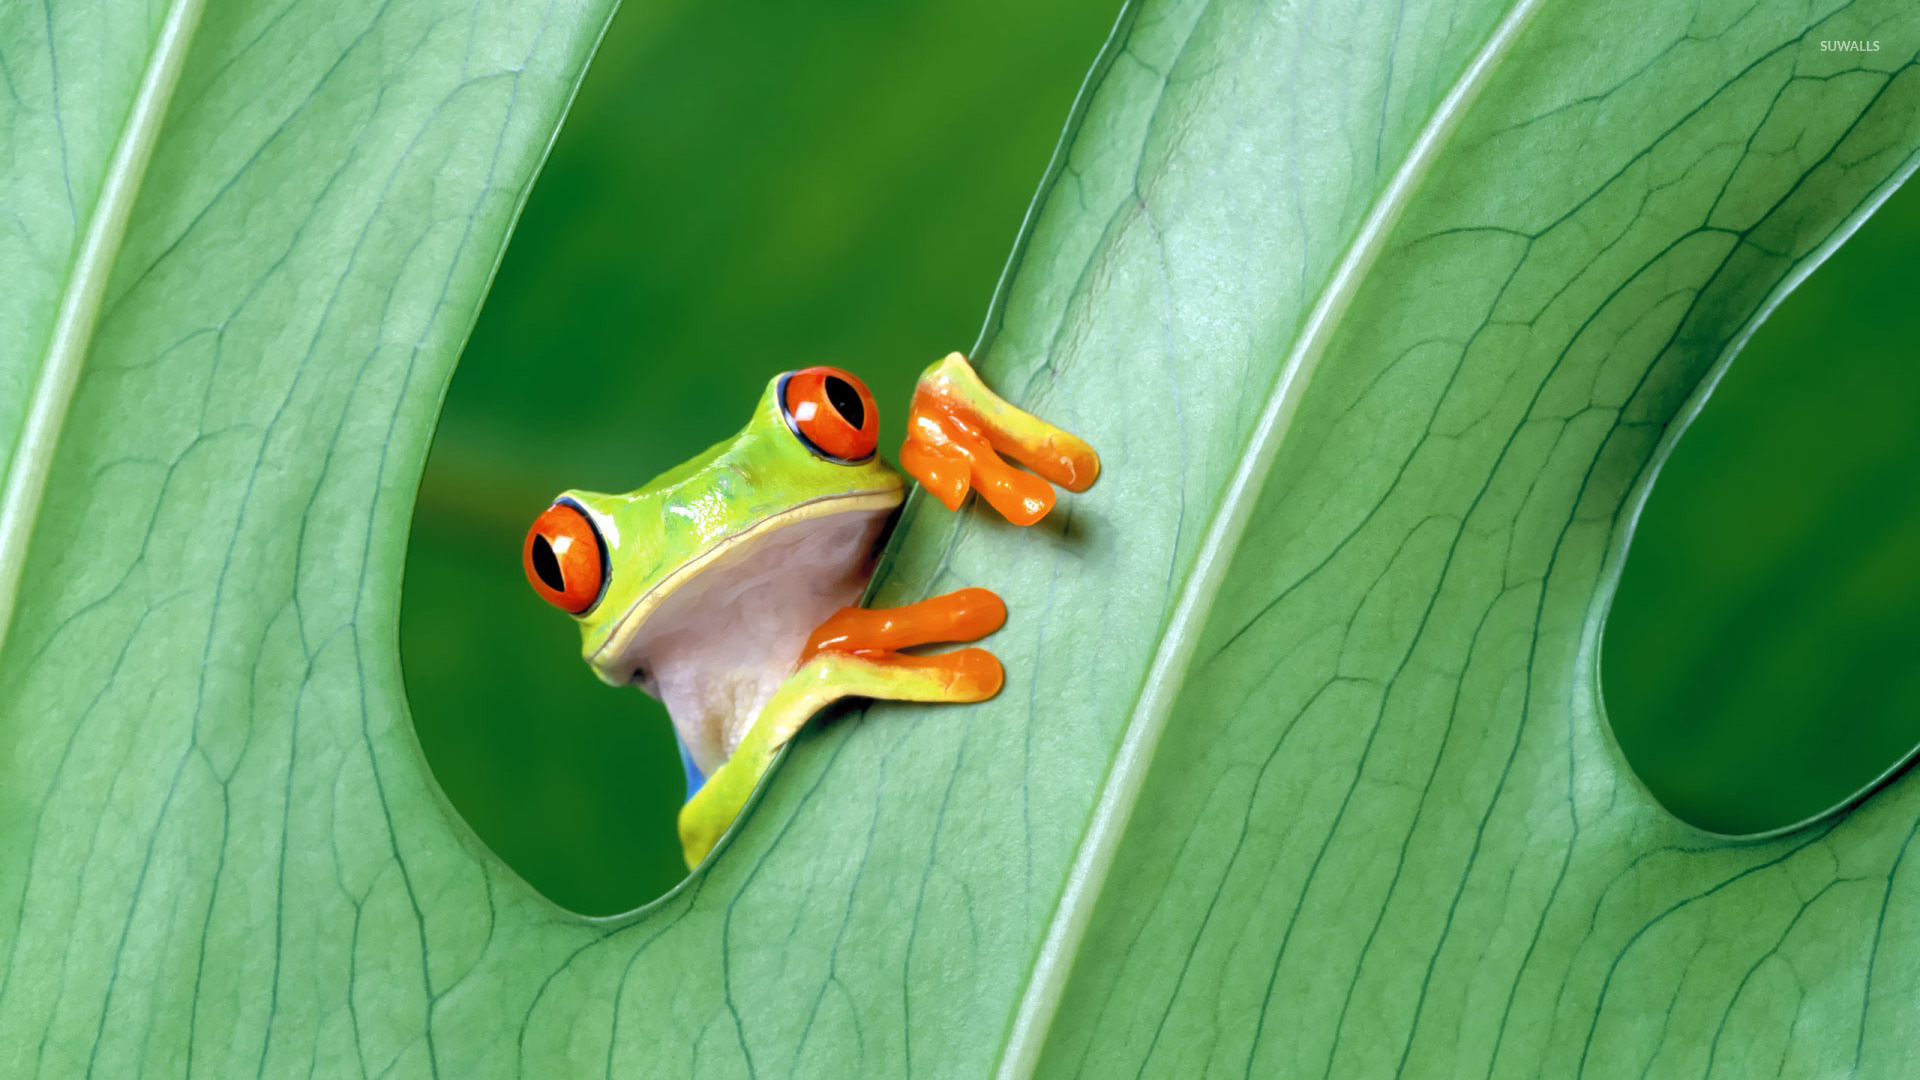 Red eyed tree frog wallpaper   Animal wallpapers   19866 1920x1080